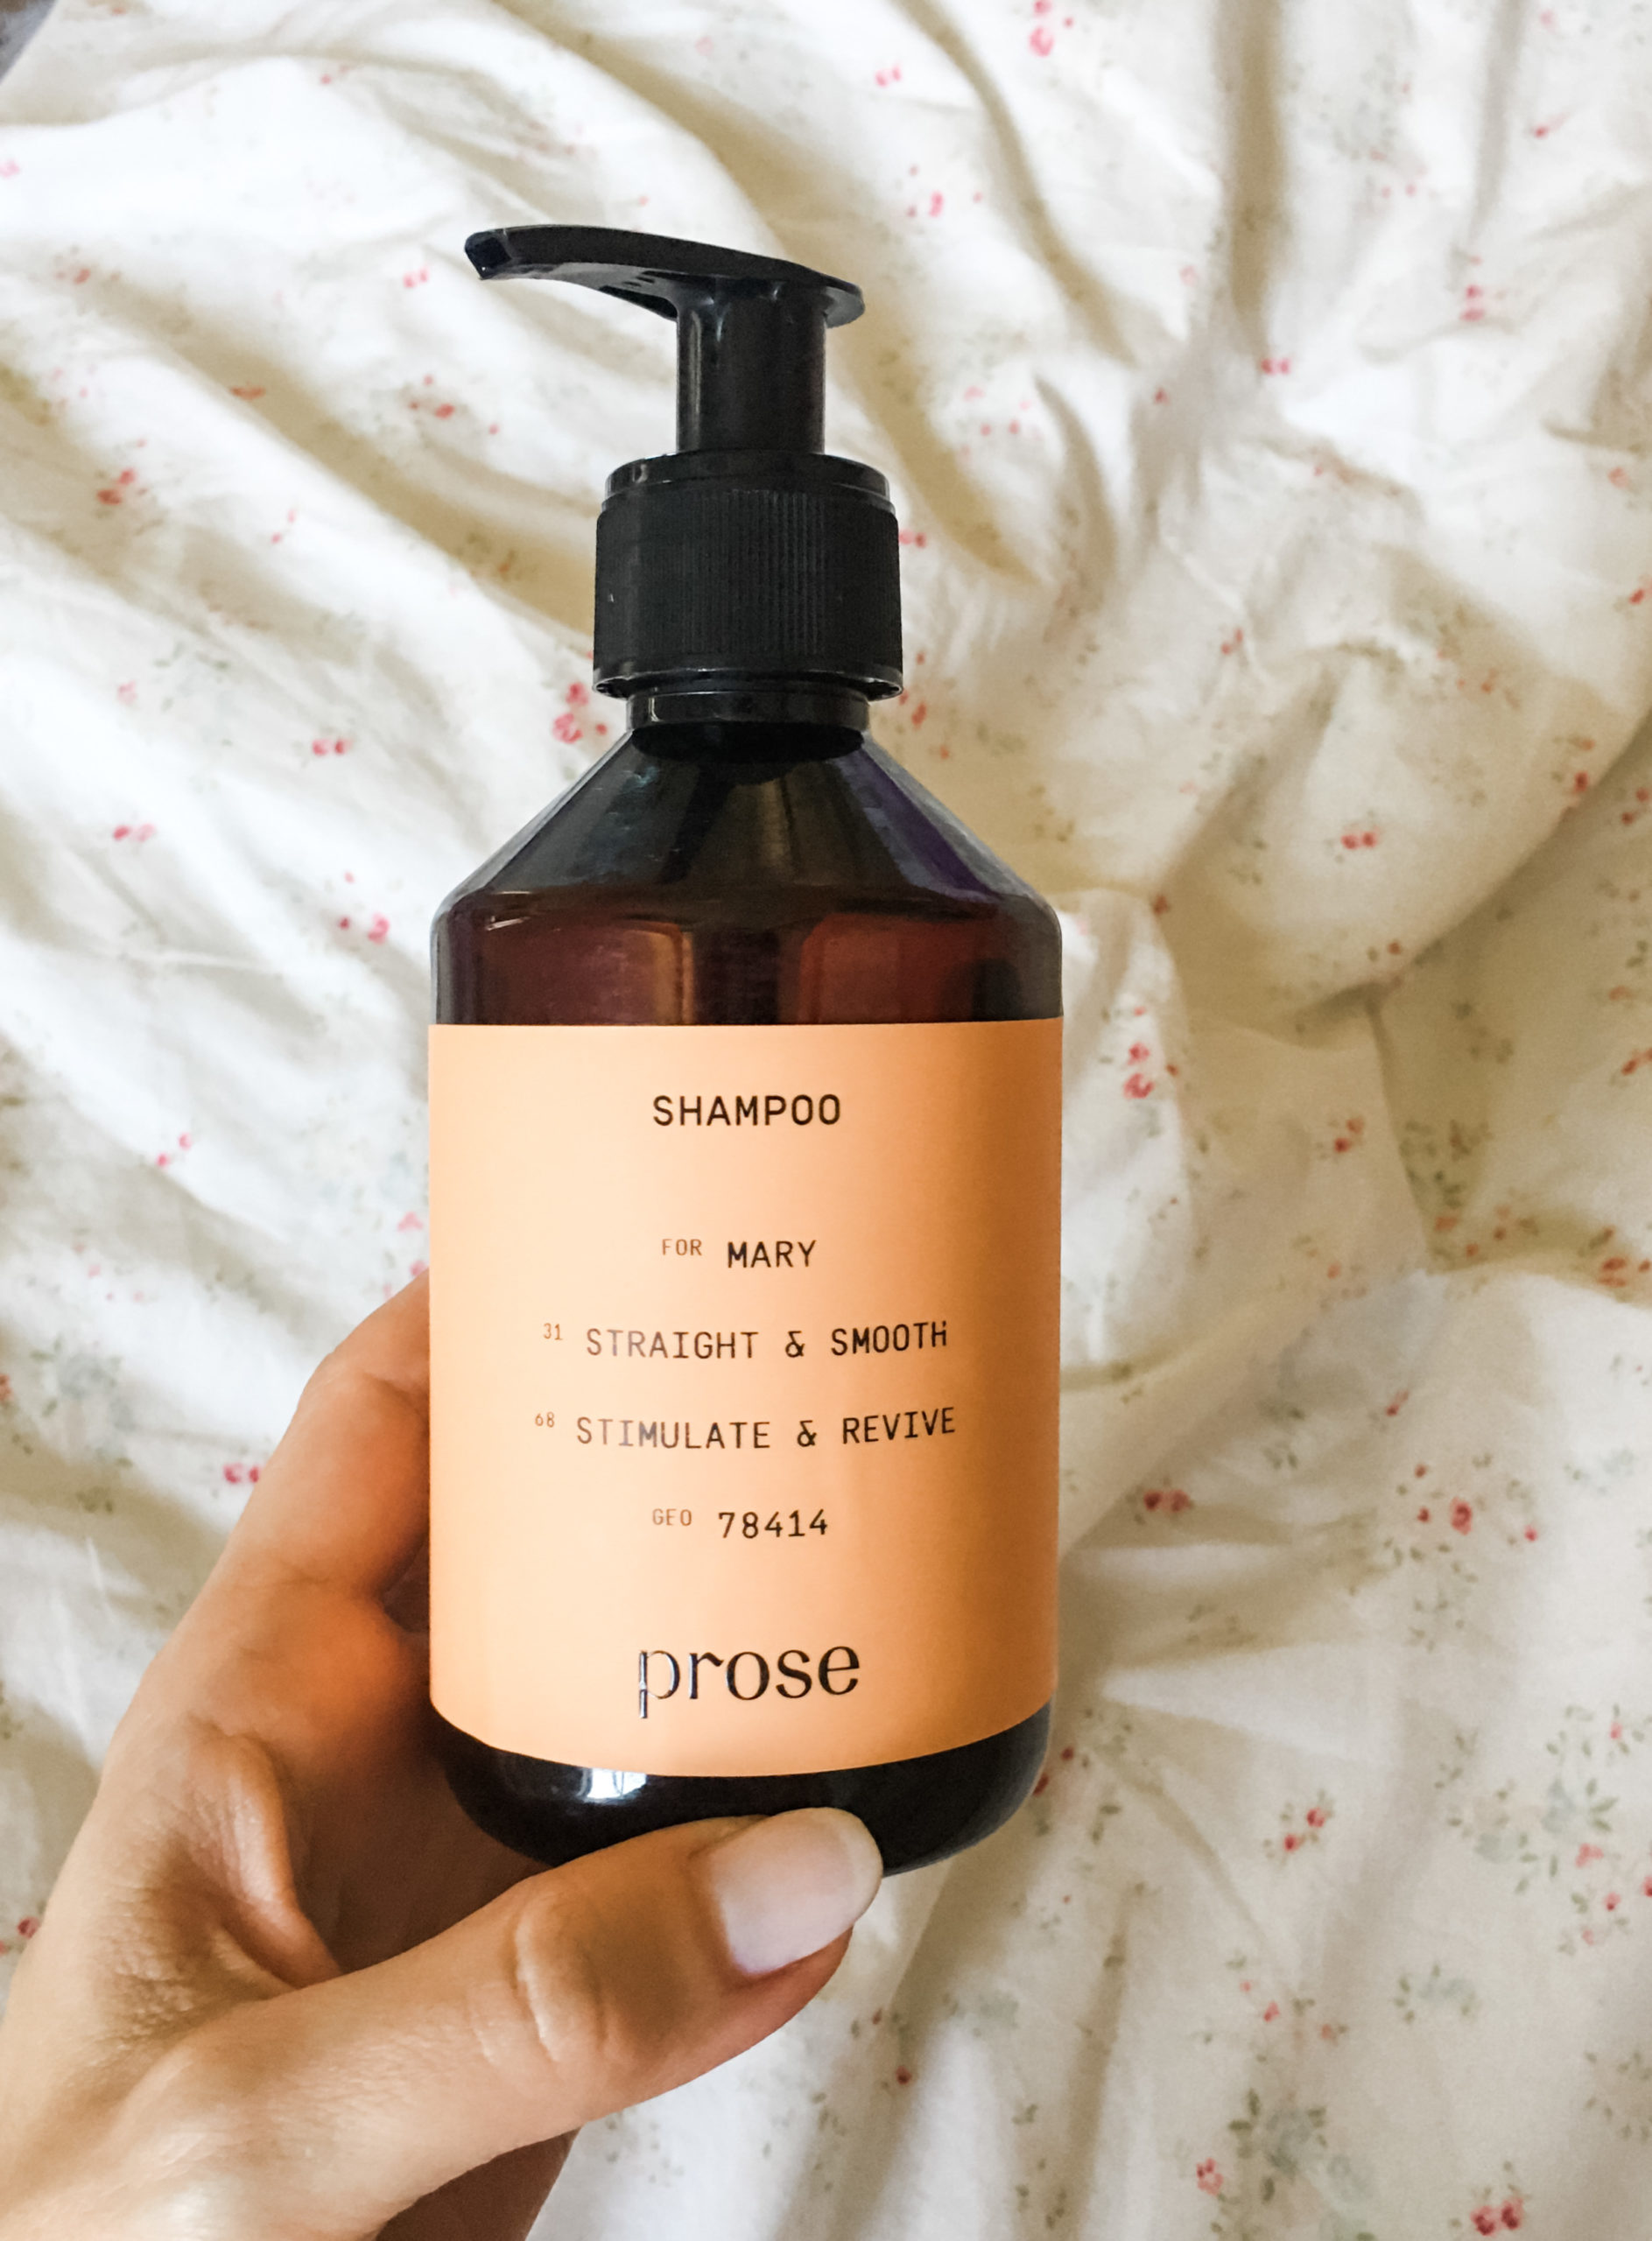 Should You Try Custom Hair Care? A Skeptic Reports On Personalized Shampoo